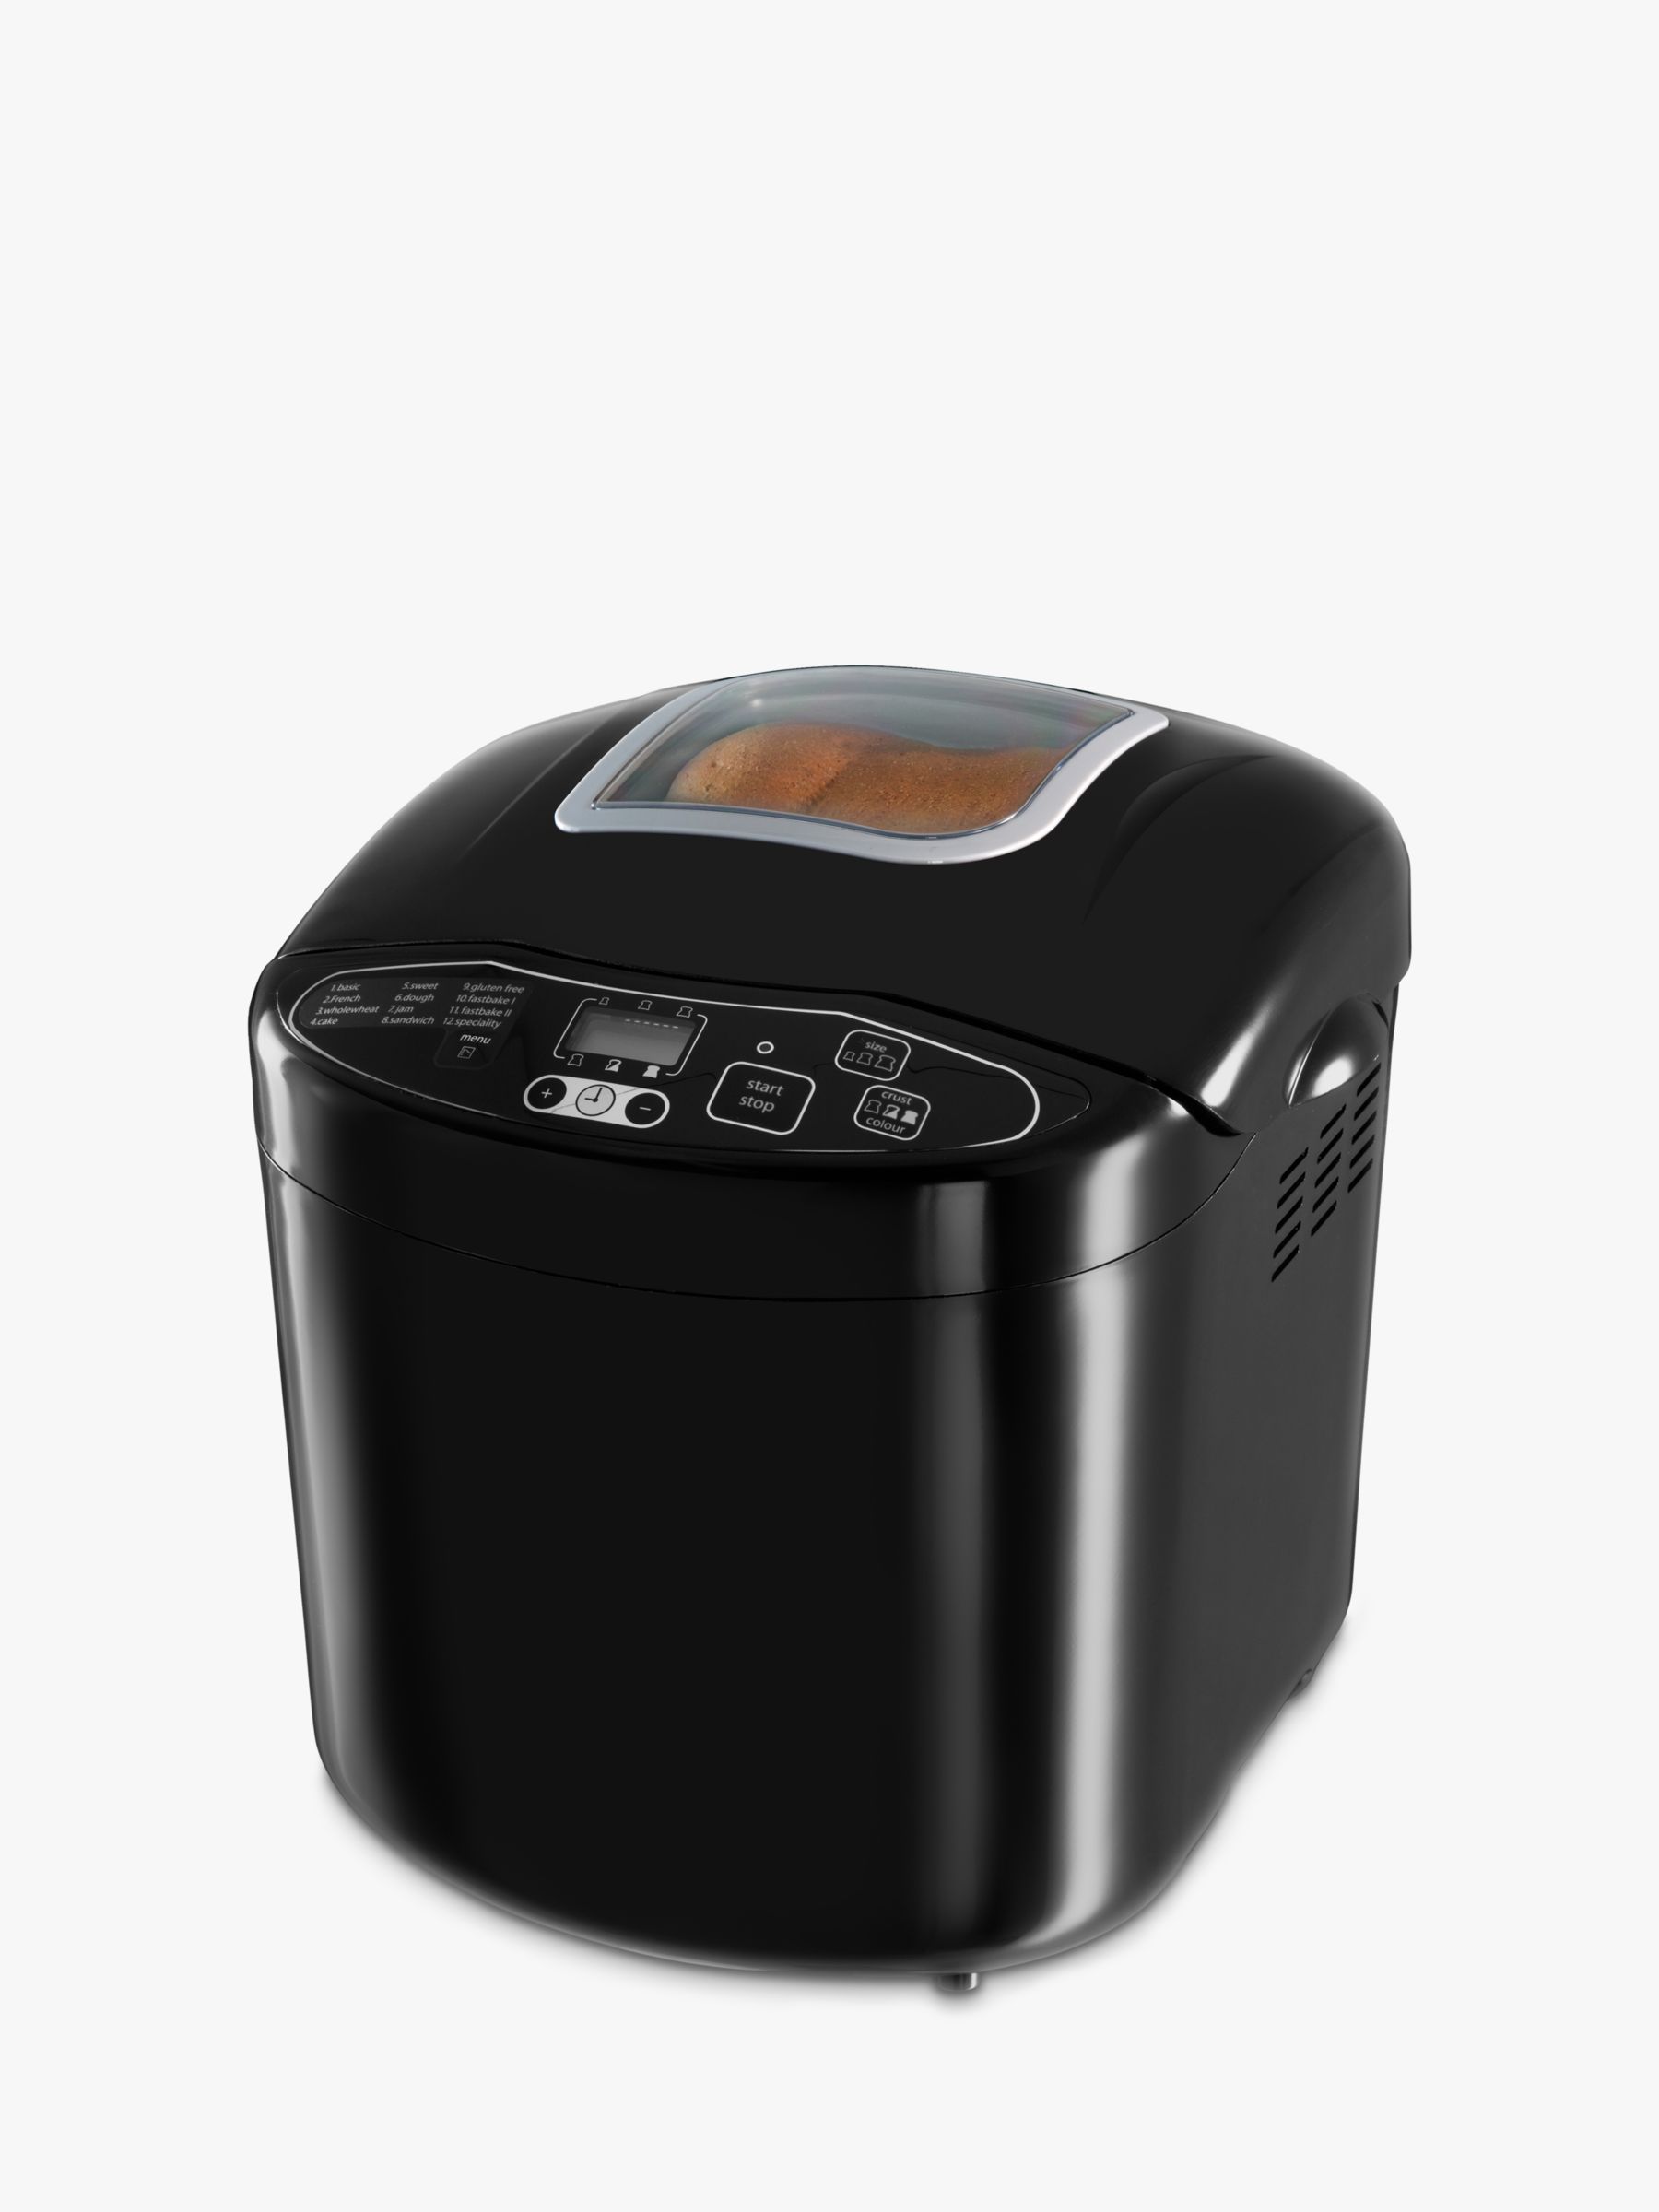 Russell Hobbs Compact Bread Maker 